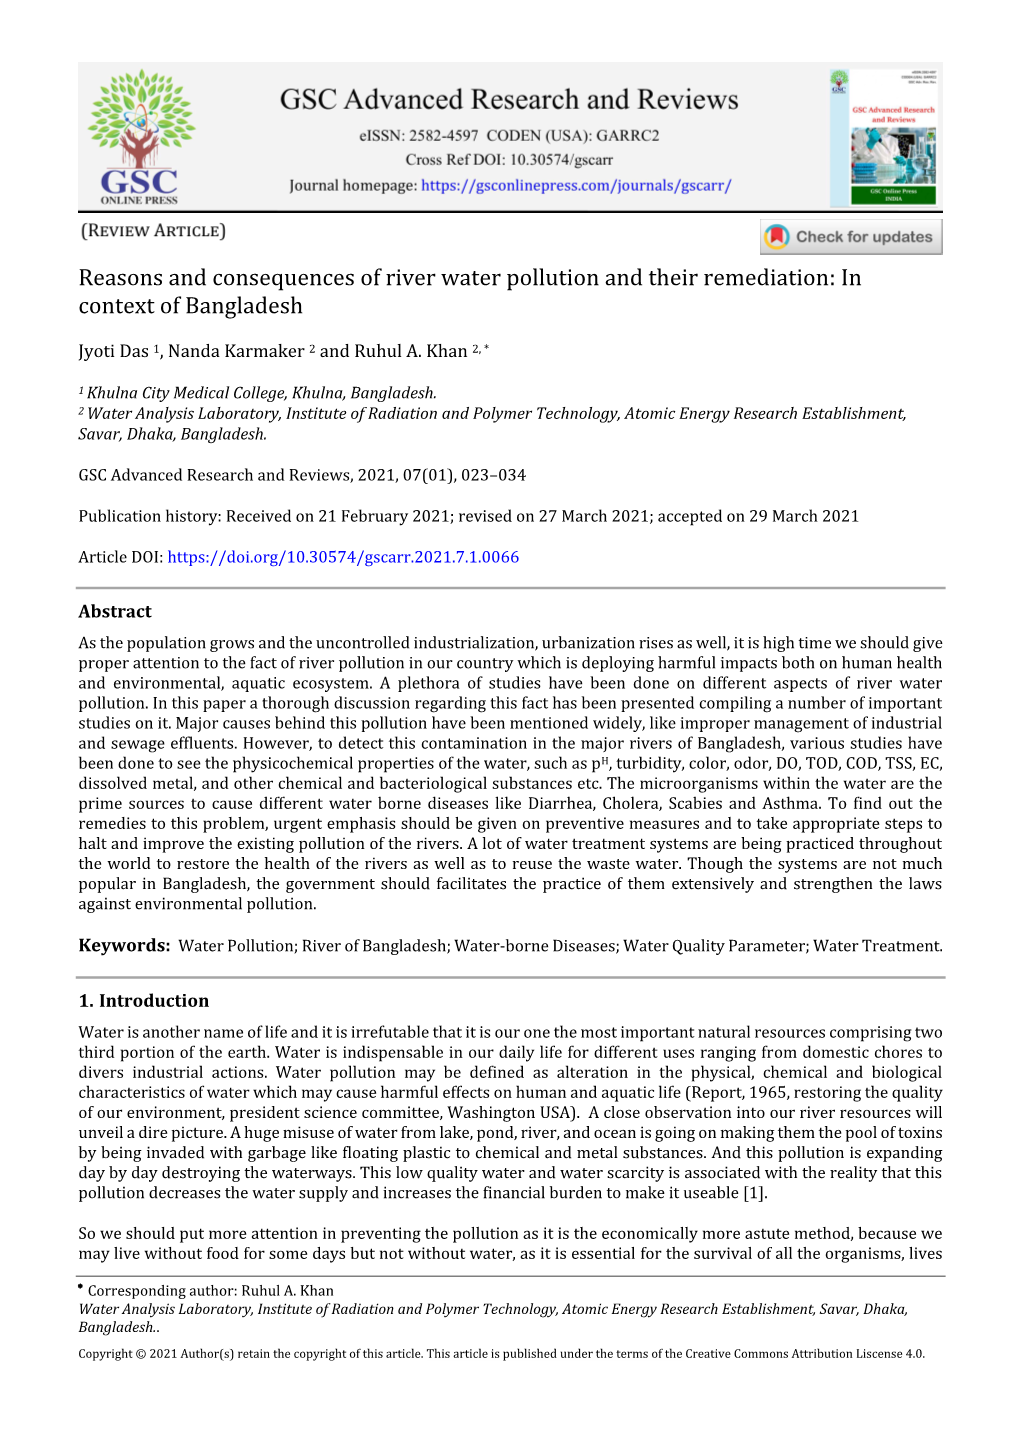 Reasons and Consequences of River Water Pollution and Their Remediation: in Context of Bangladesh